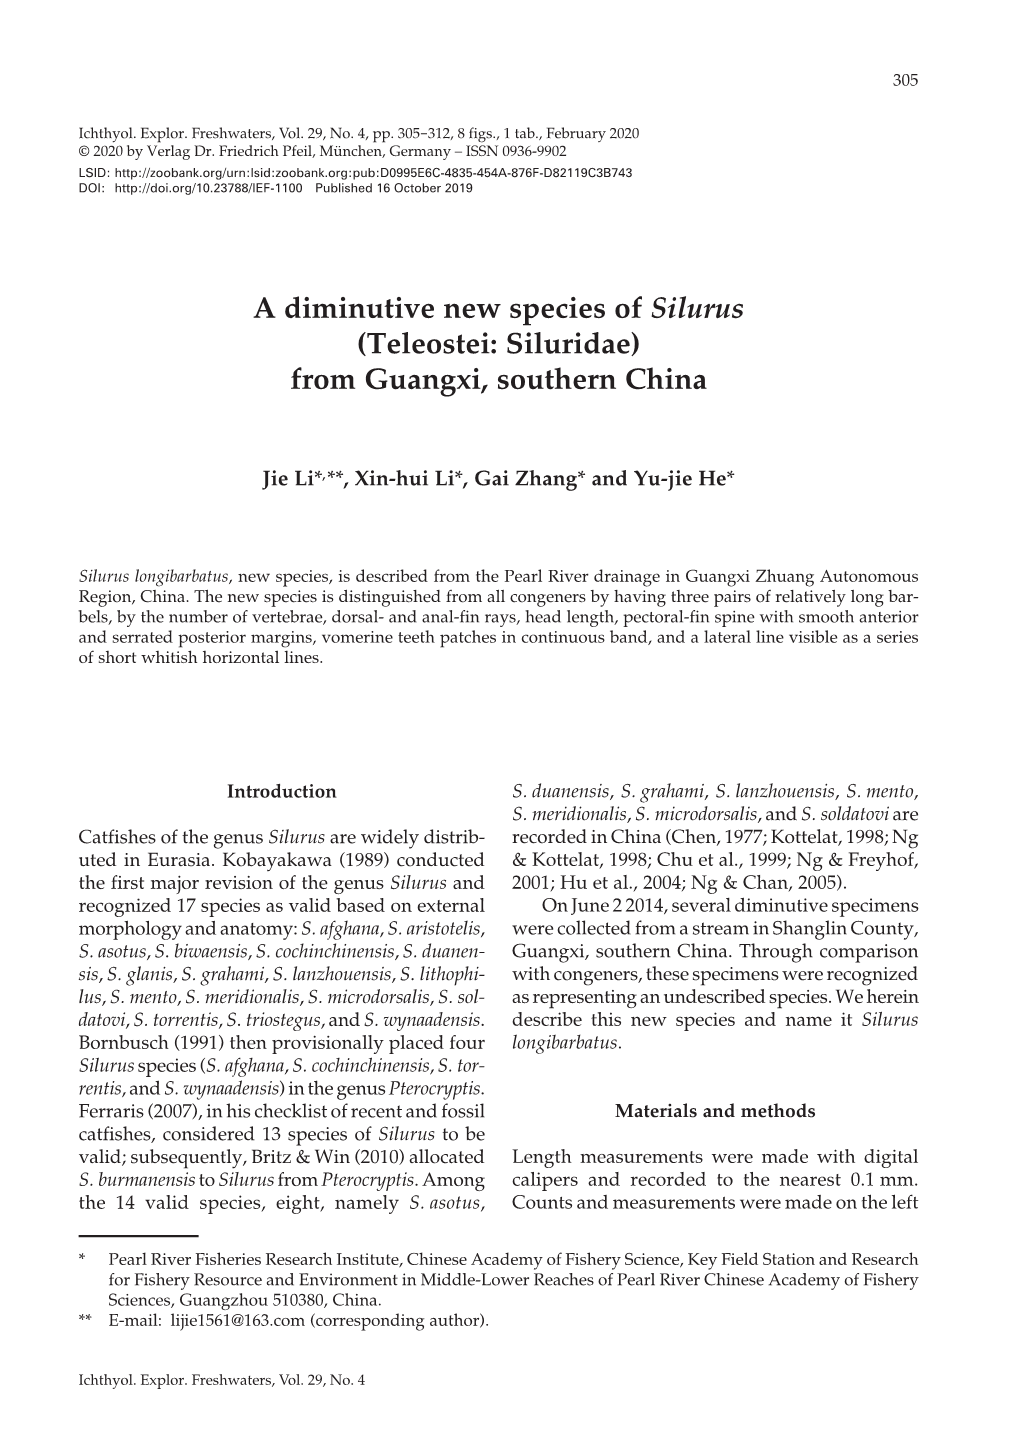 A Diminutive New Species of Silurus (Teleostei: Siluridae) from Guangxi, Southern China